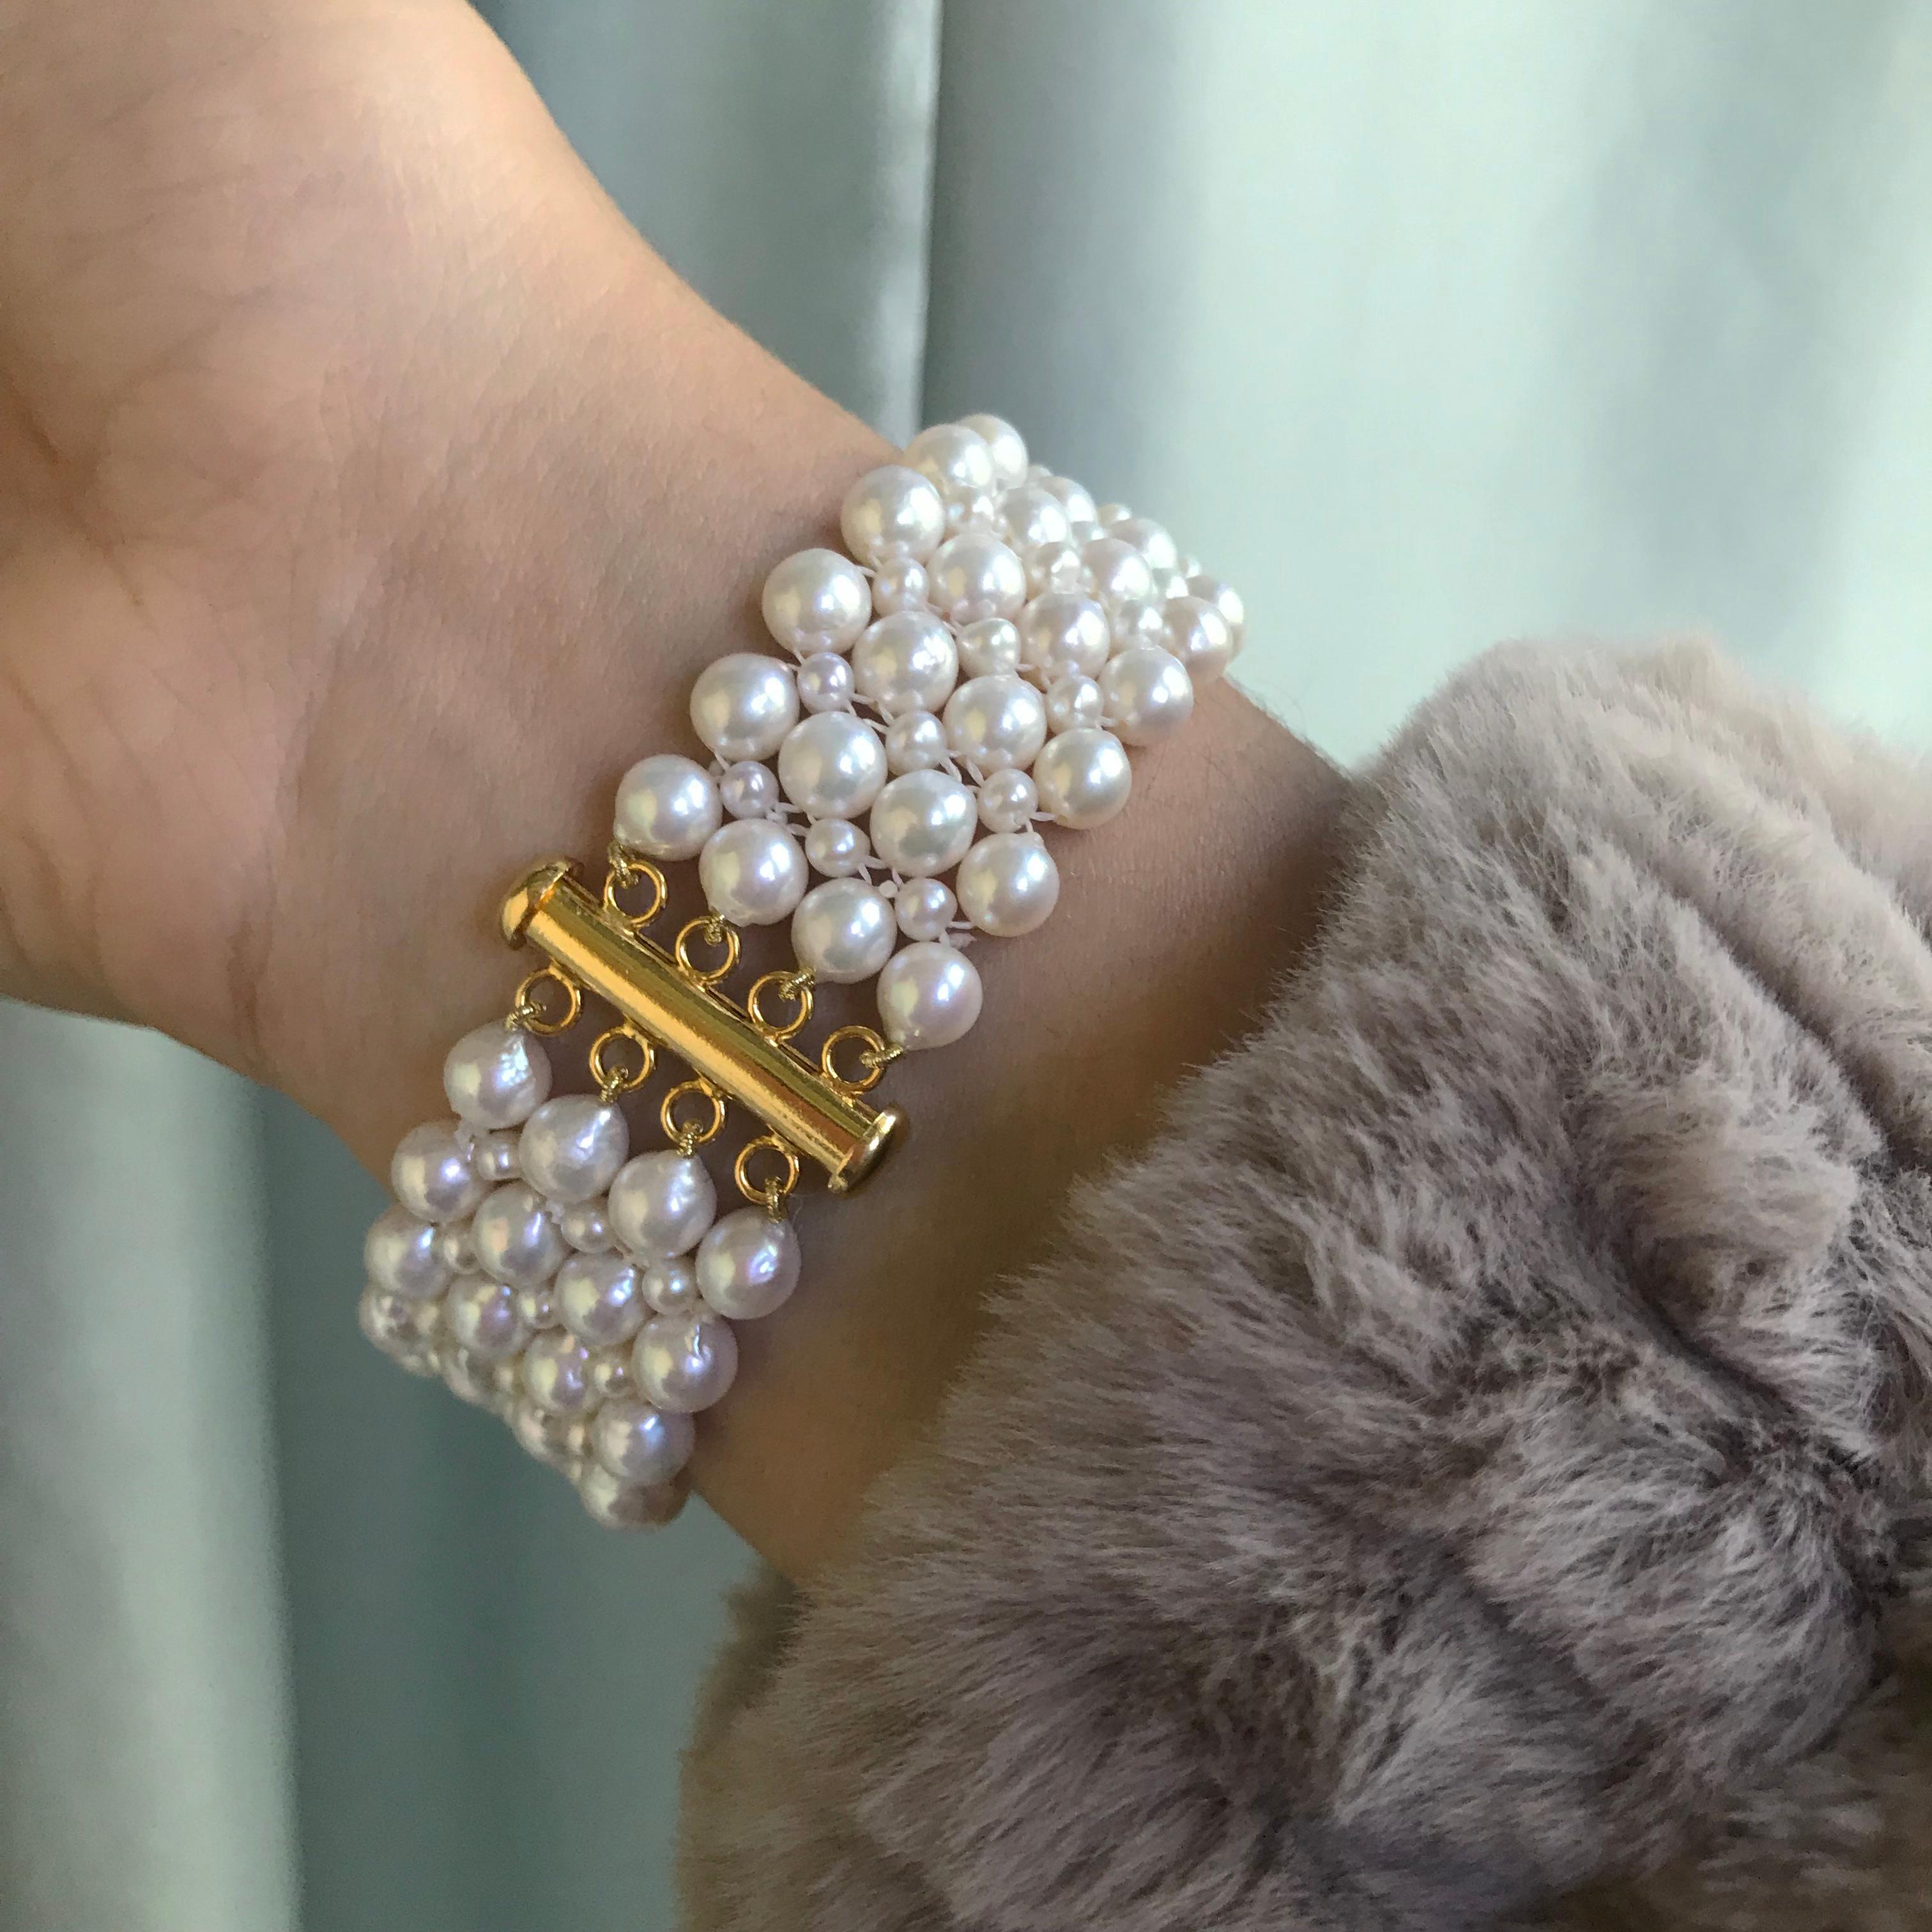 Artist Marina J. Woven Pearl Bracelet with 14 Karat Yellow Gold Plated Clasp